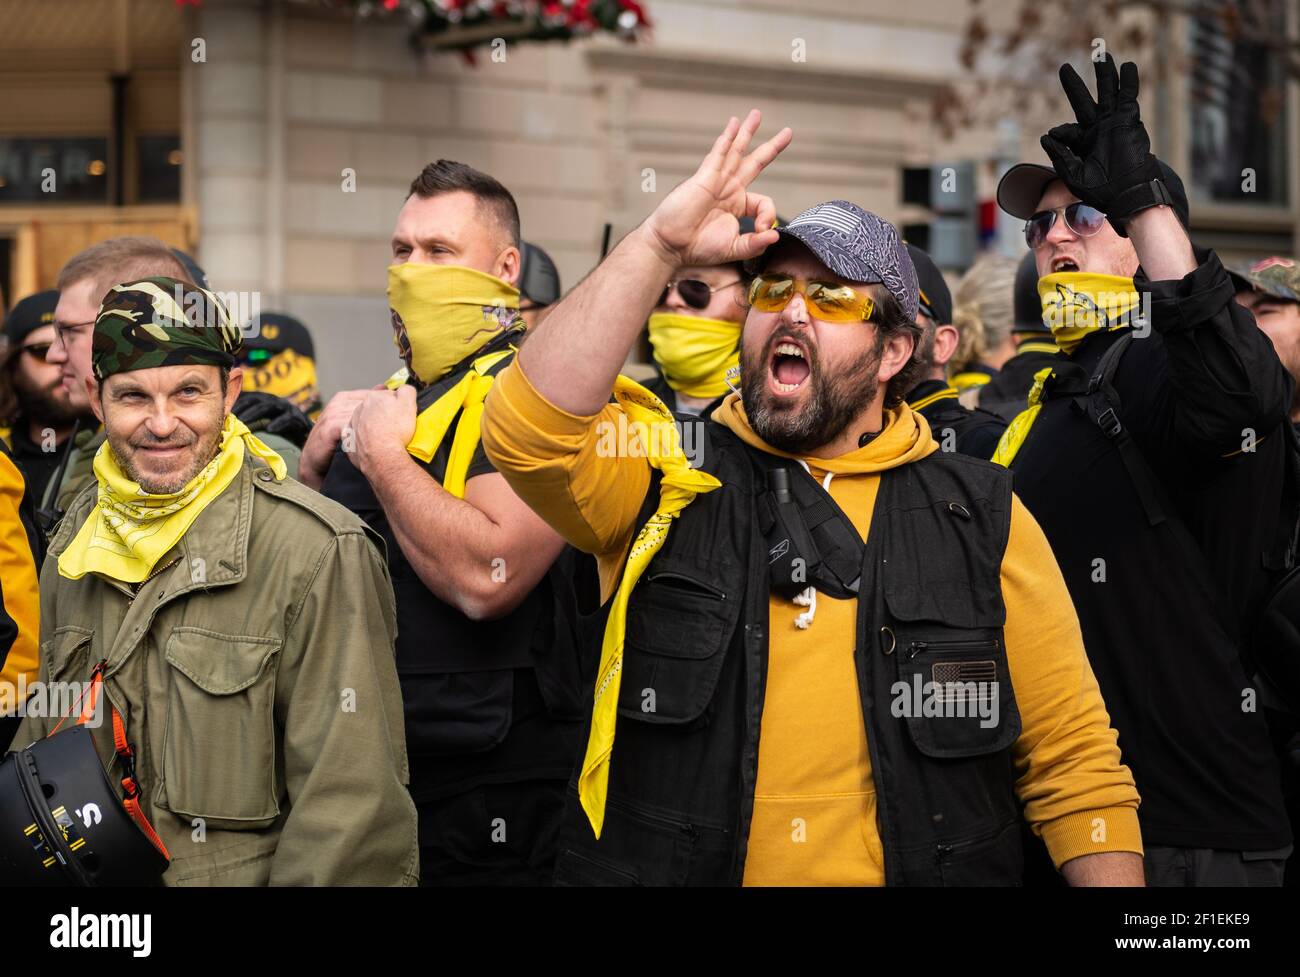 Die rechtsextreme Gruppe The Proud Boys nimmt am 12. Dezember 2020 in Washington, DC, an der Kundgebung "Stop the Steal" Teil. Stockfoto